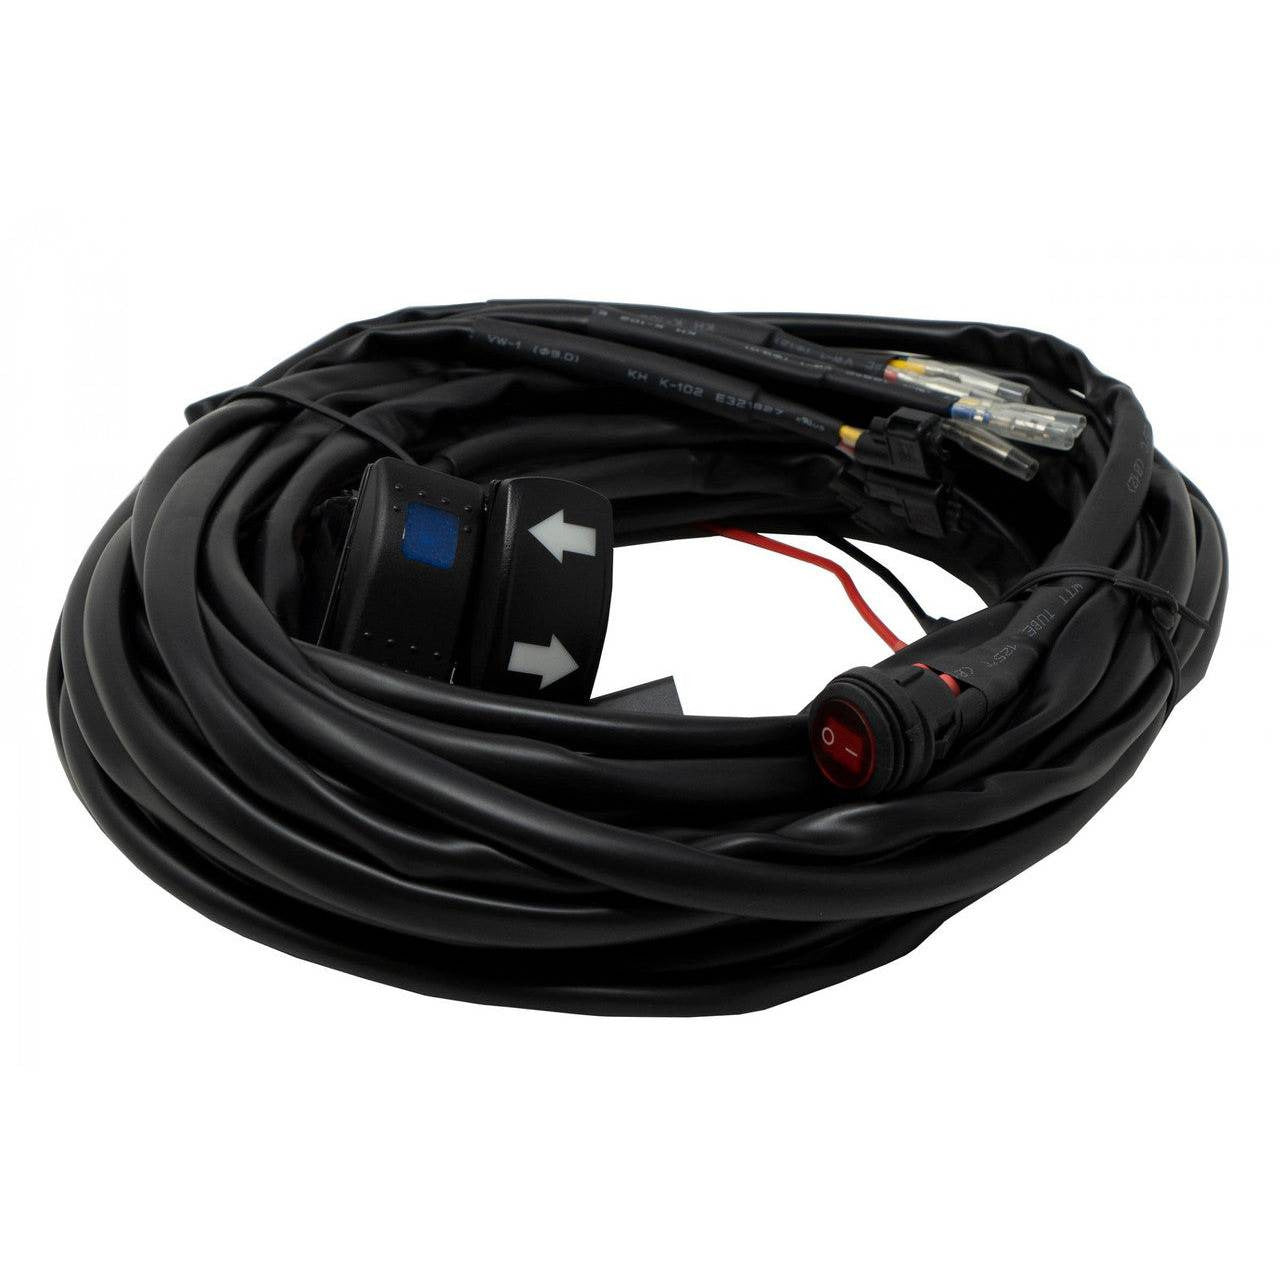 RTL-S Turn Signal Wiring Harness with Switch